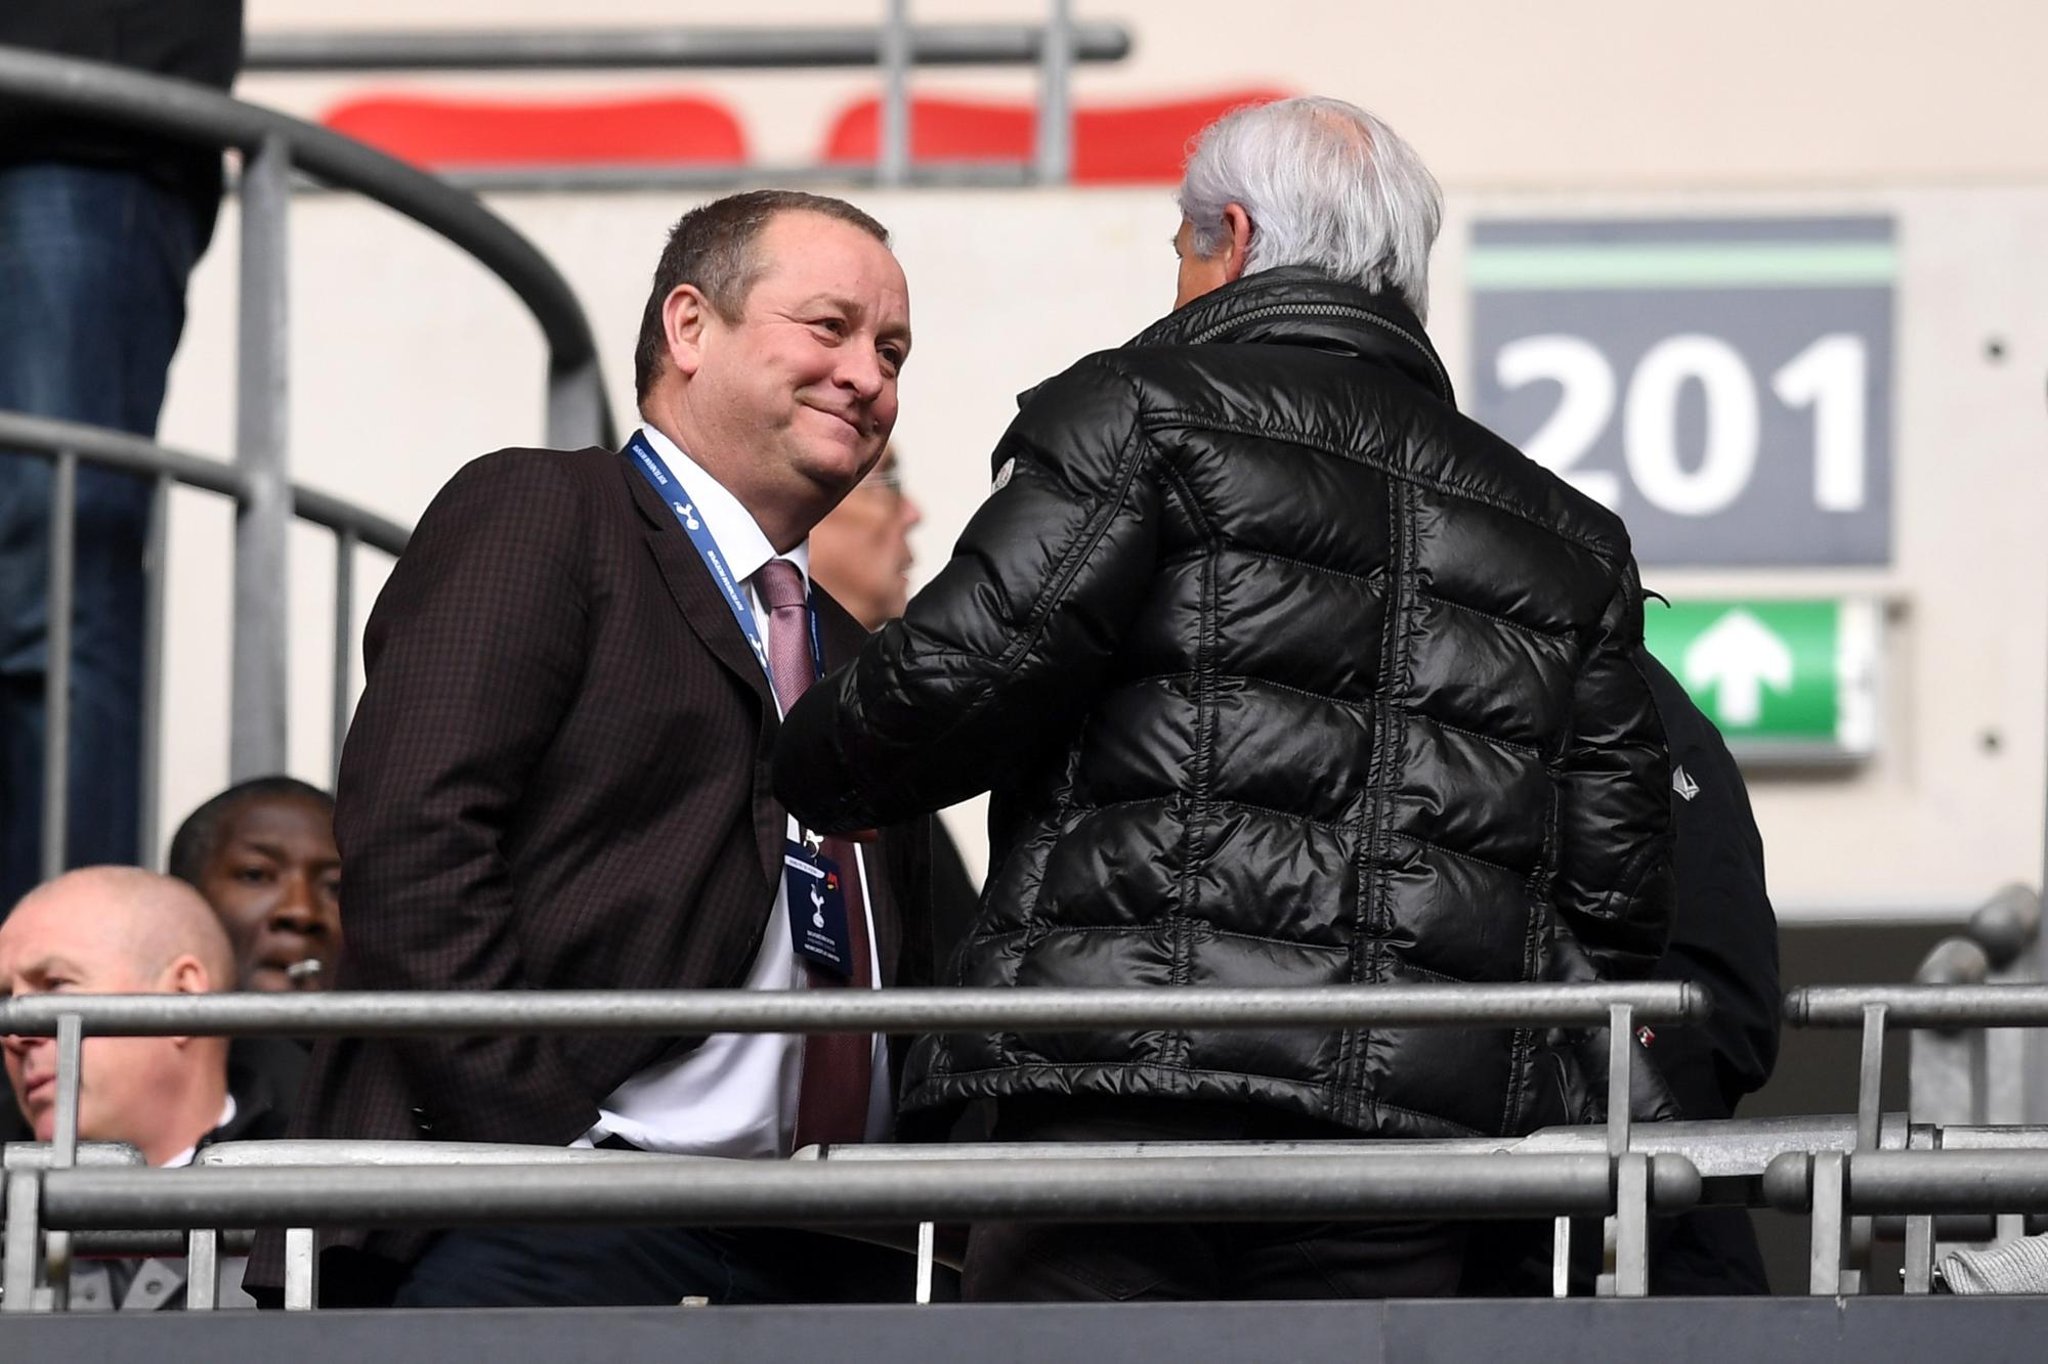 Alan Biggs on rumours of a Sheffield United takeover and Mike Ashley interest